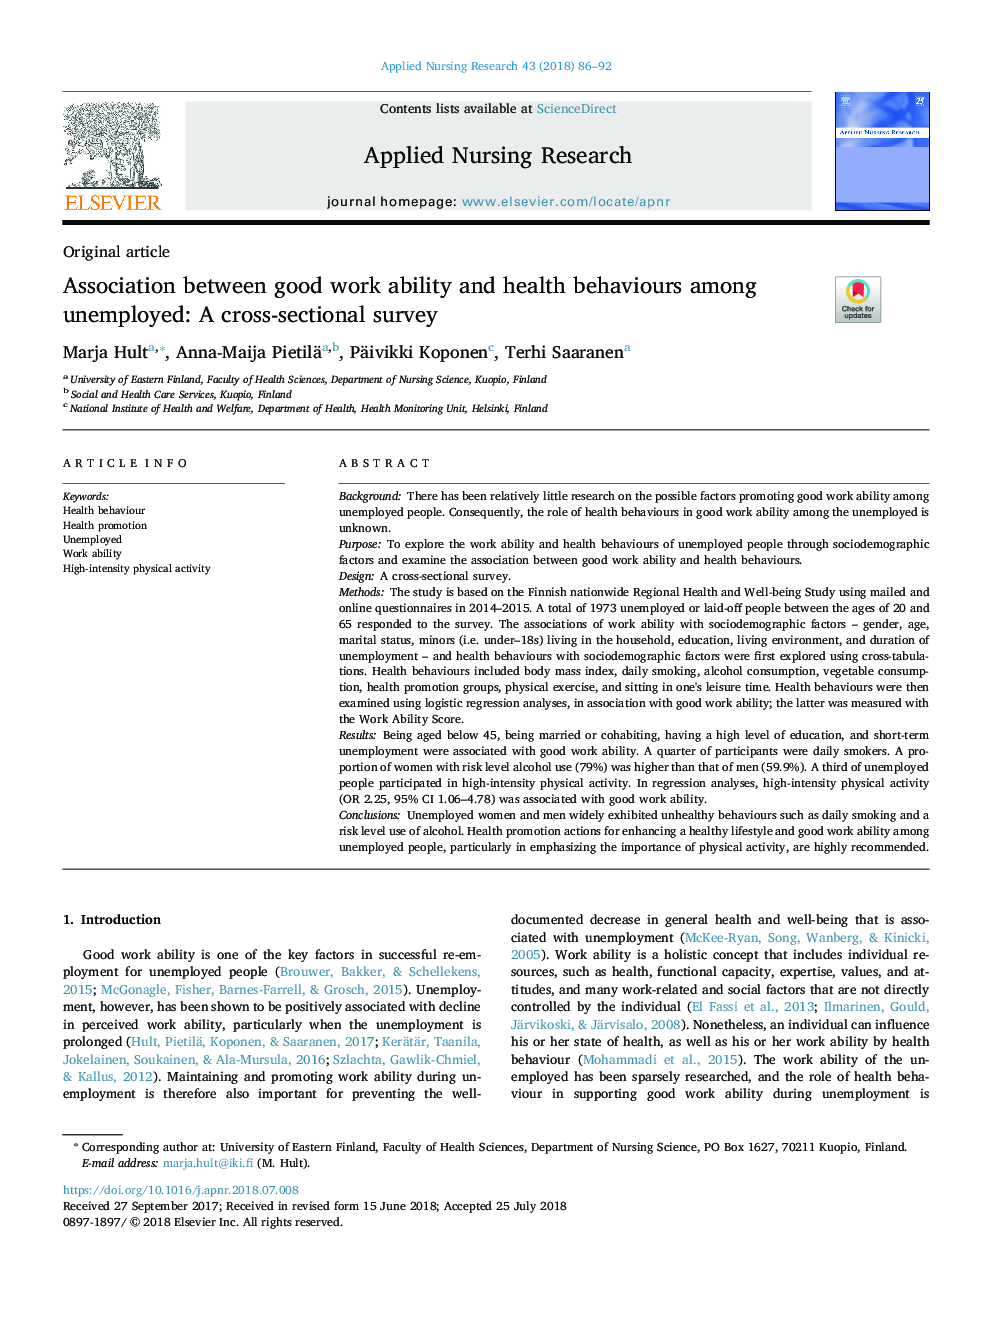 Association between good work ability and health behaviours among unemployed: A cross-sectional survey